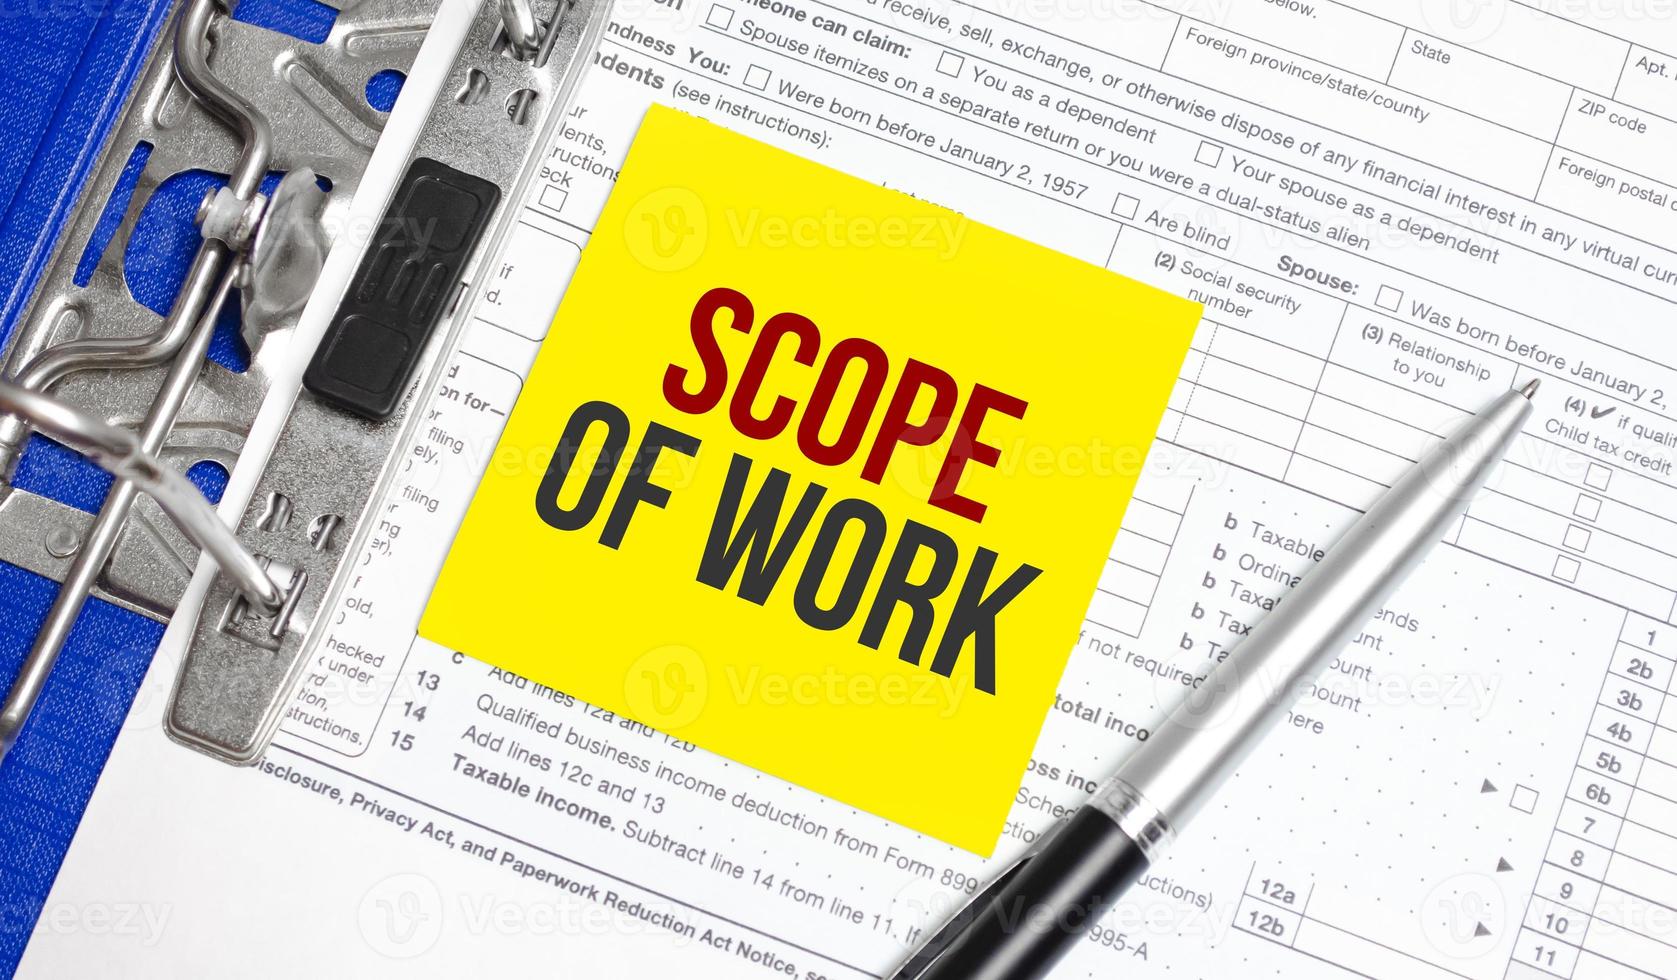 Scope Of Work words on yellow sticker with tax forms and pen photo